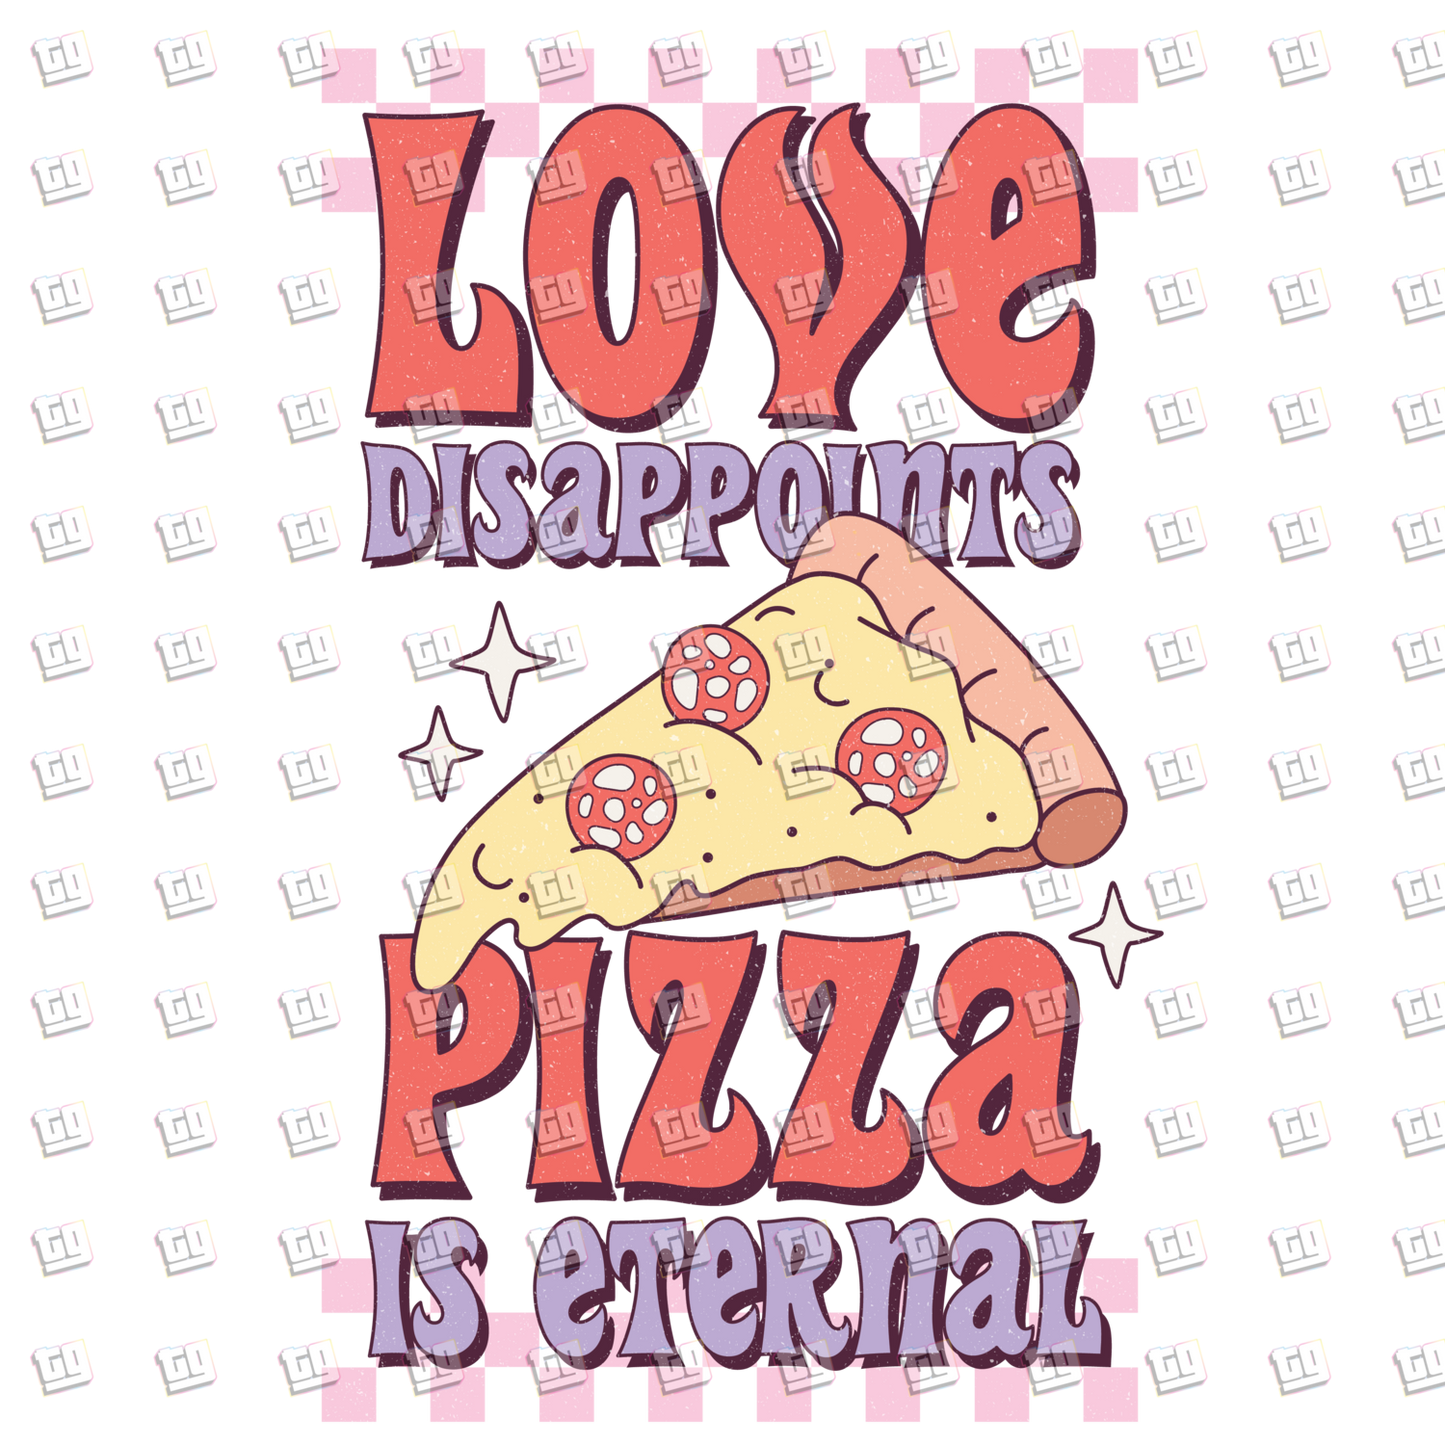 Love Disappoints Pizza is Eternal - Valentines - DTF Transfer